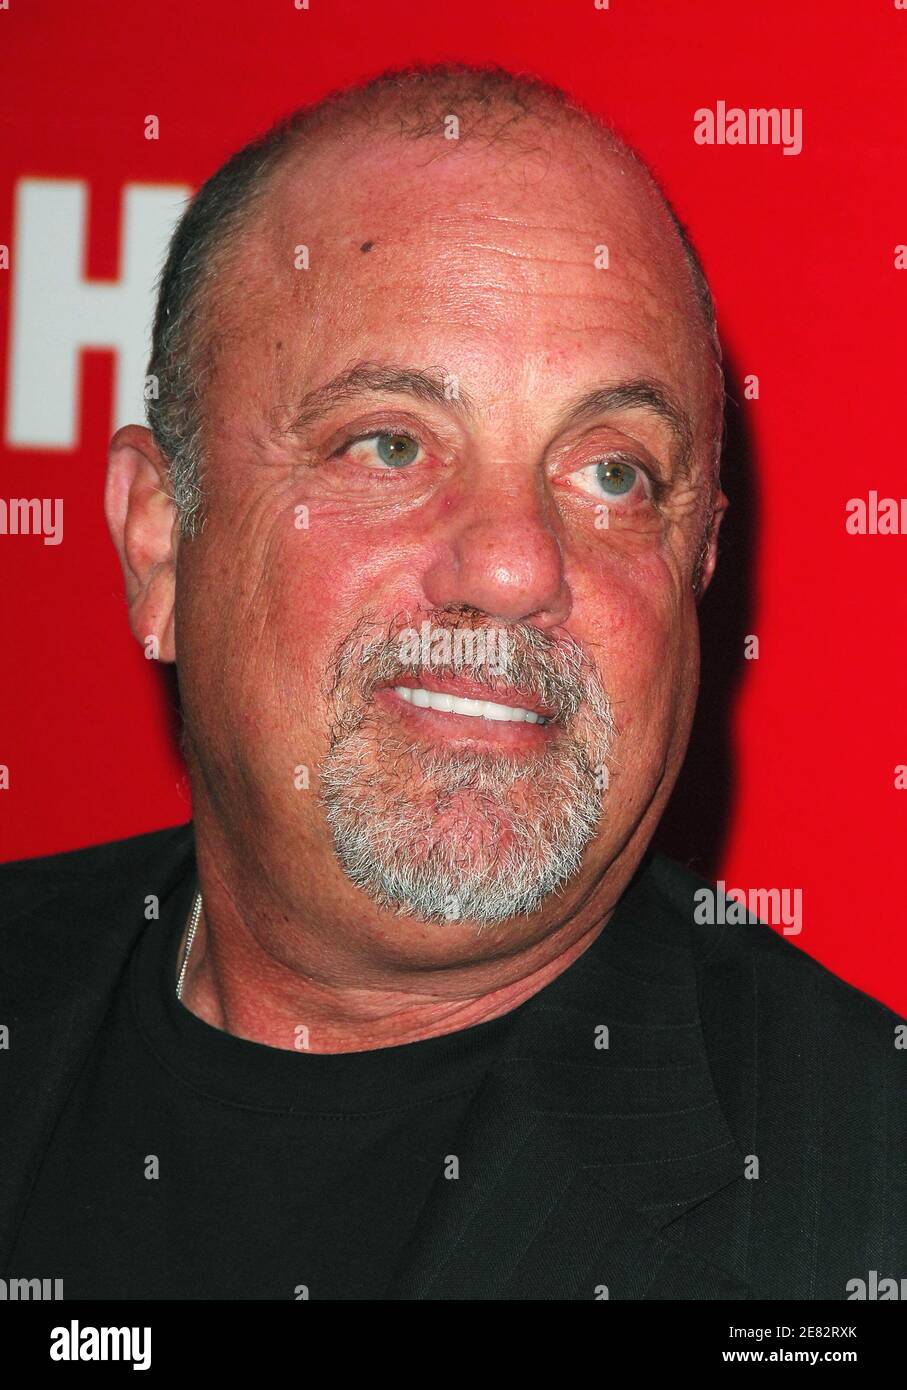 Musician Billy Joel attends the Fourth Season Premiere of 'Entourage' presented by HBO at the Ziegfeld Theatre on Thursday, June 14, 2007 in New York City, USA. Photo by Gregorio Binuya/ABACAPRESS.COM Stock Photo